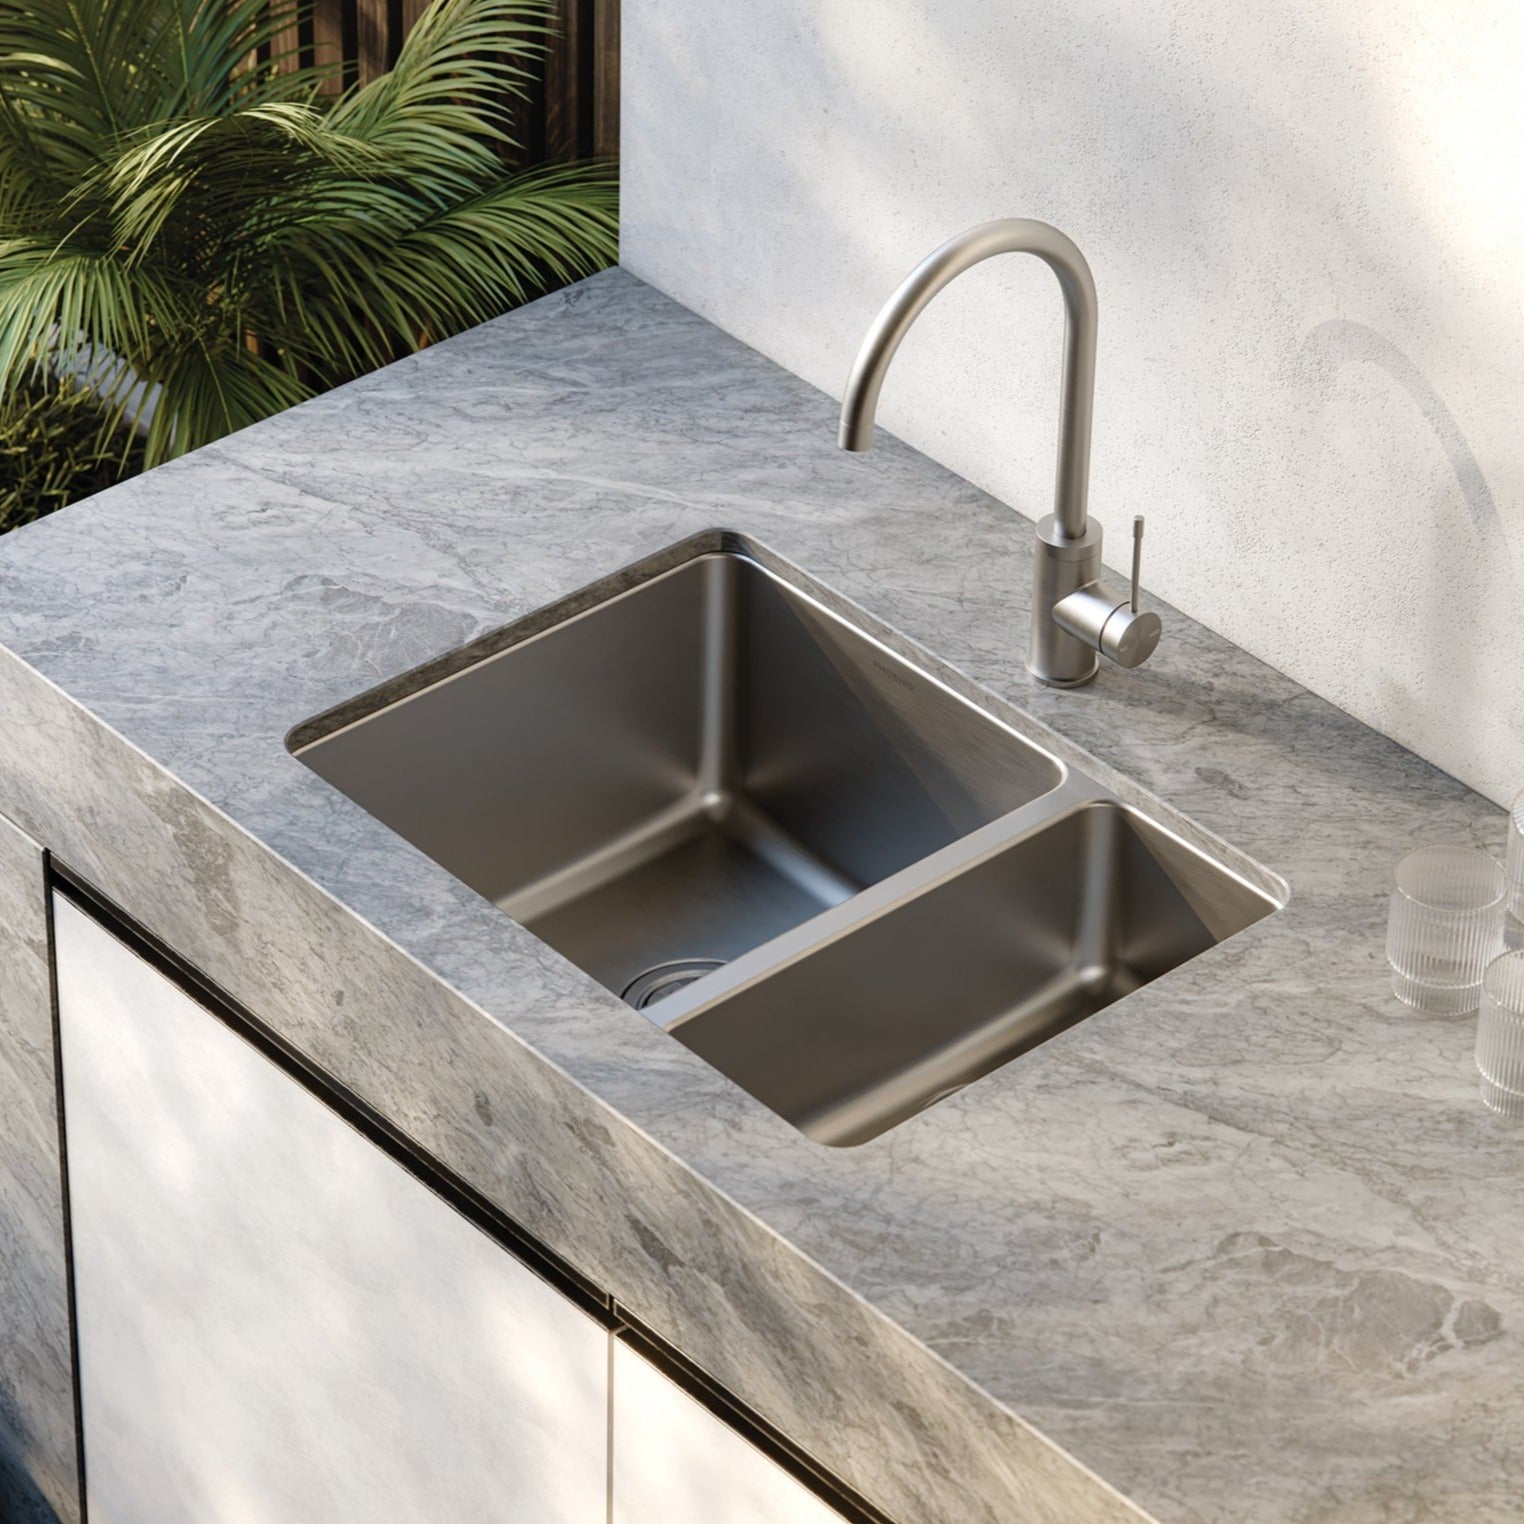 PHOENIX 2000 SERIES 1 AND 1/2 BOWL STAINLESS STEEL SINK 617MM